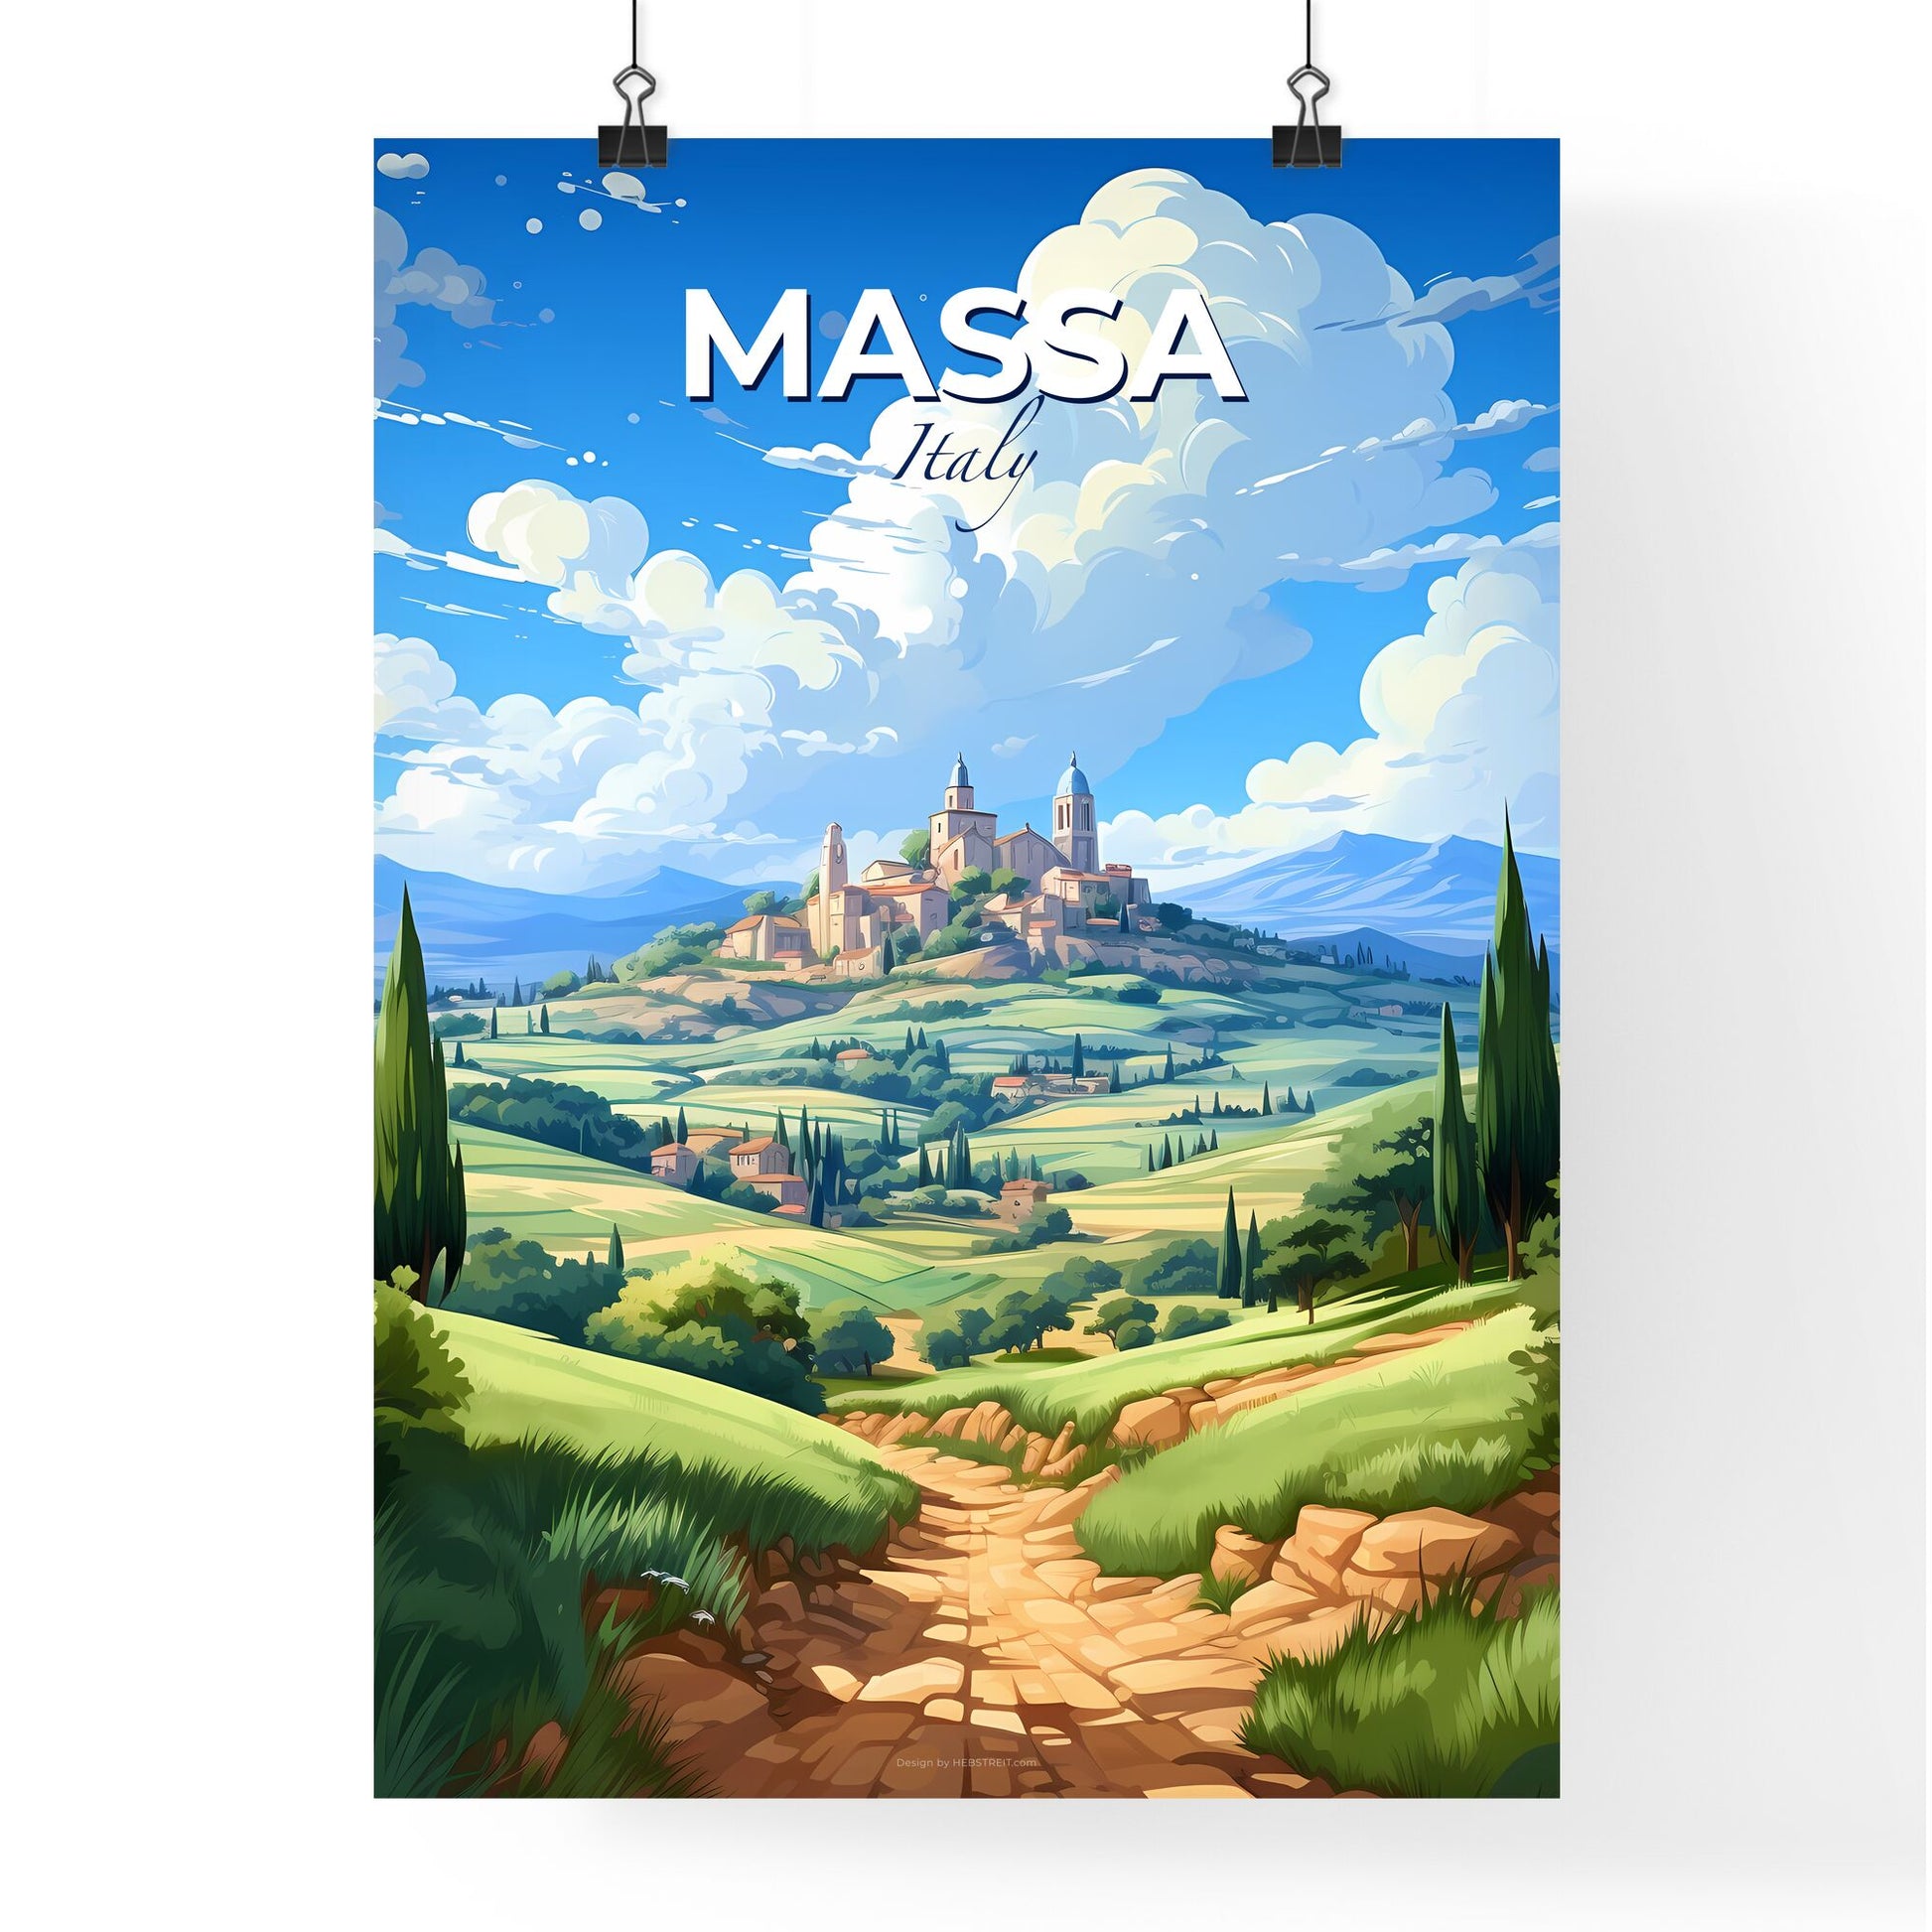 Massa, Italy, A Poster of a landscape with a road and trees and a castle on top Default Title